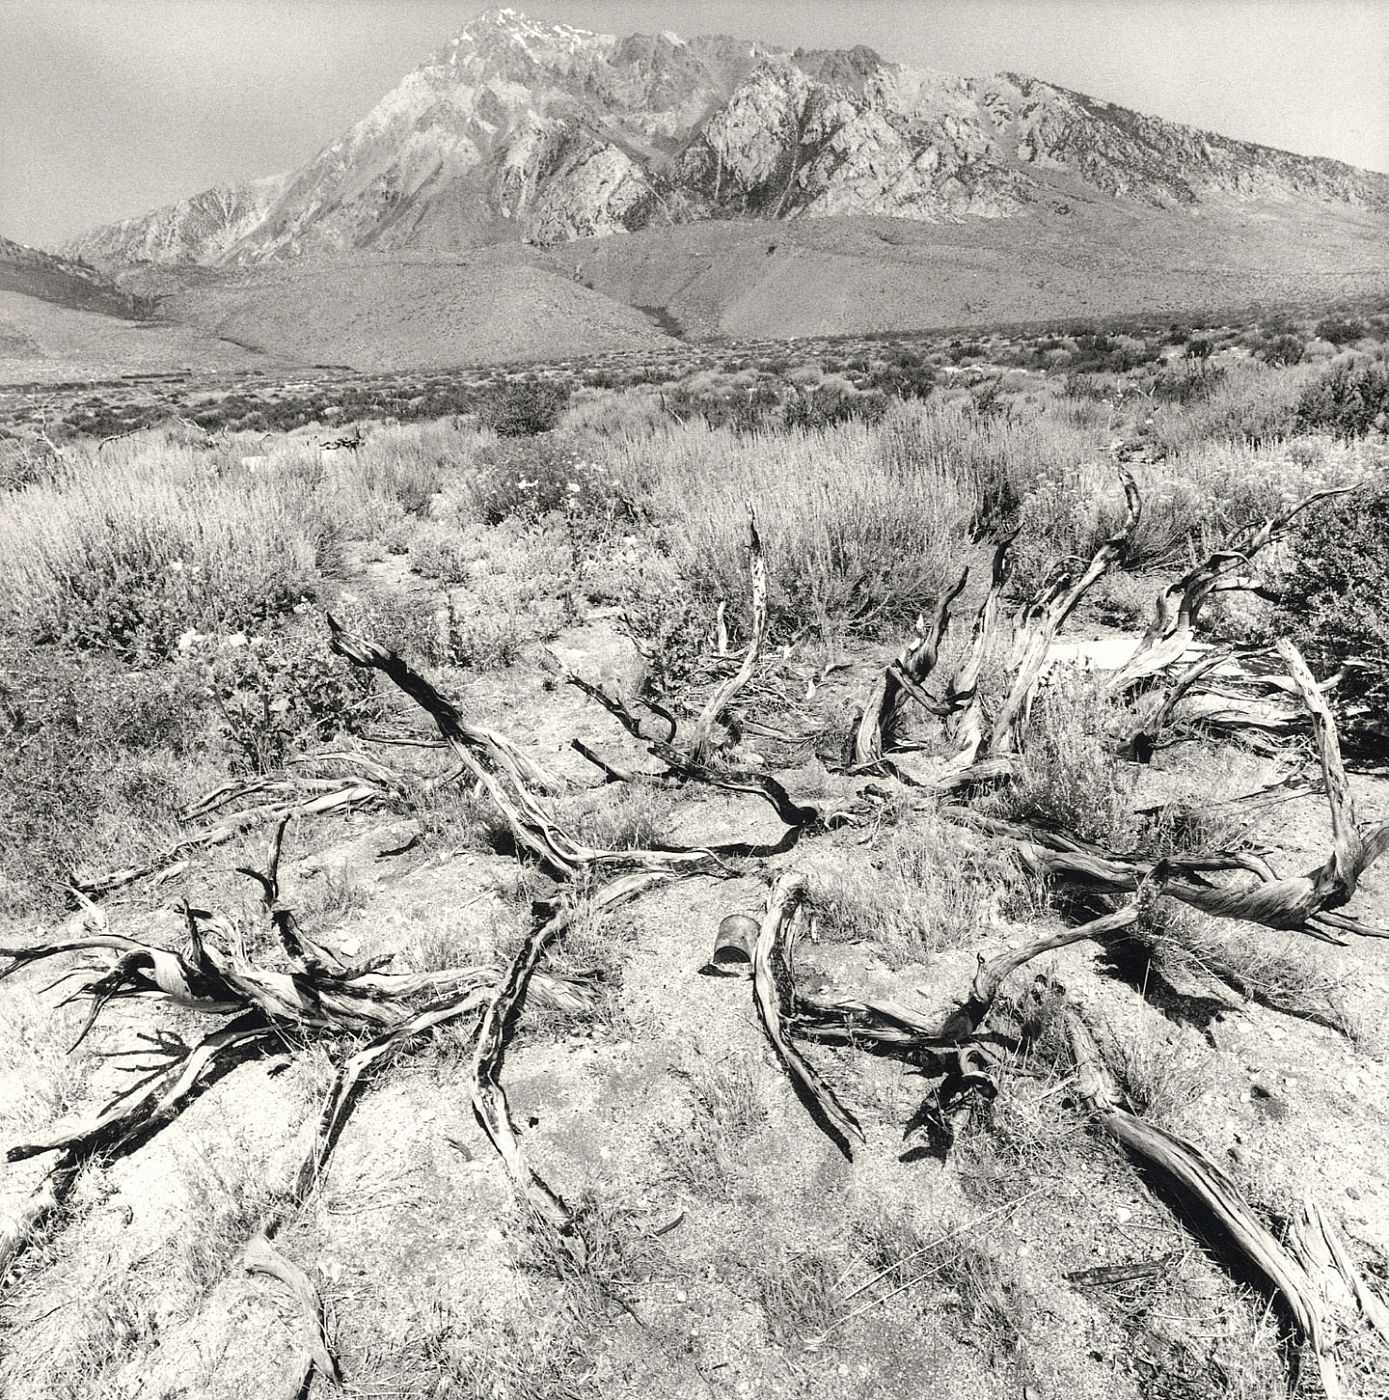 Lee Friedlander: Recent Western Landscape 2008-09 (Mary Boone Gallery), Limited Edition [SIGNED]